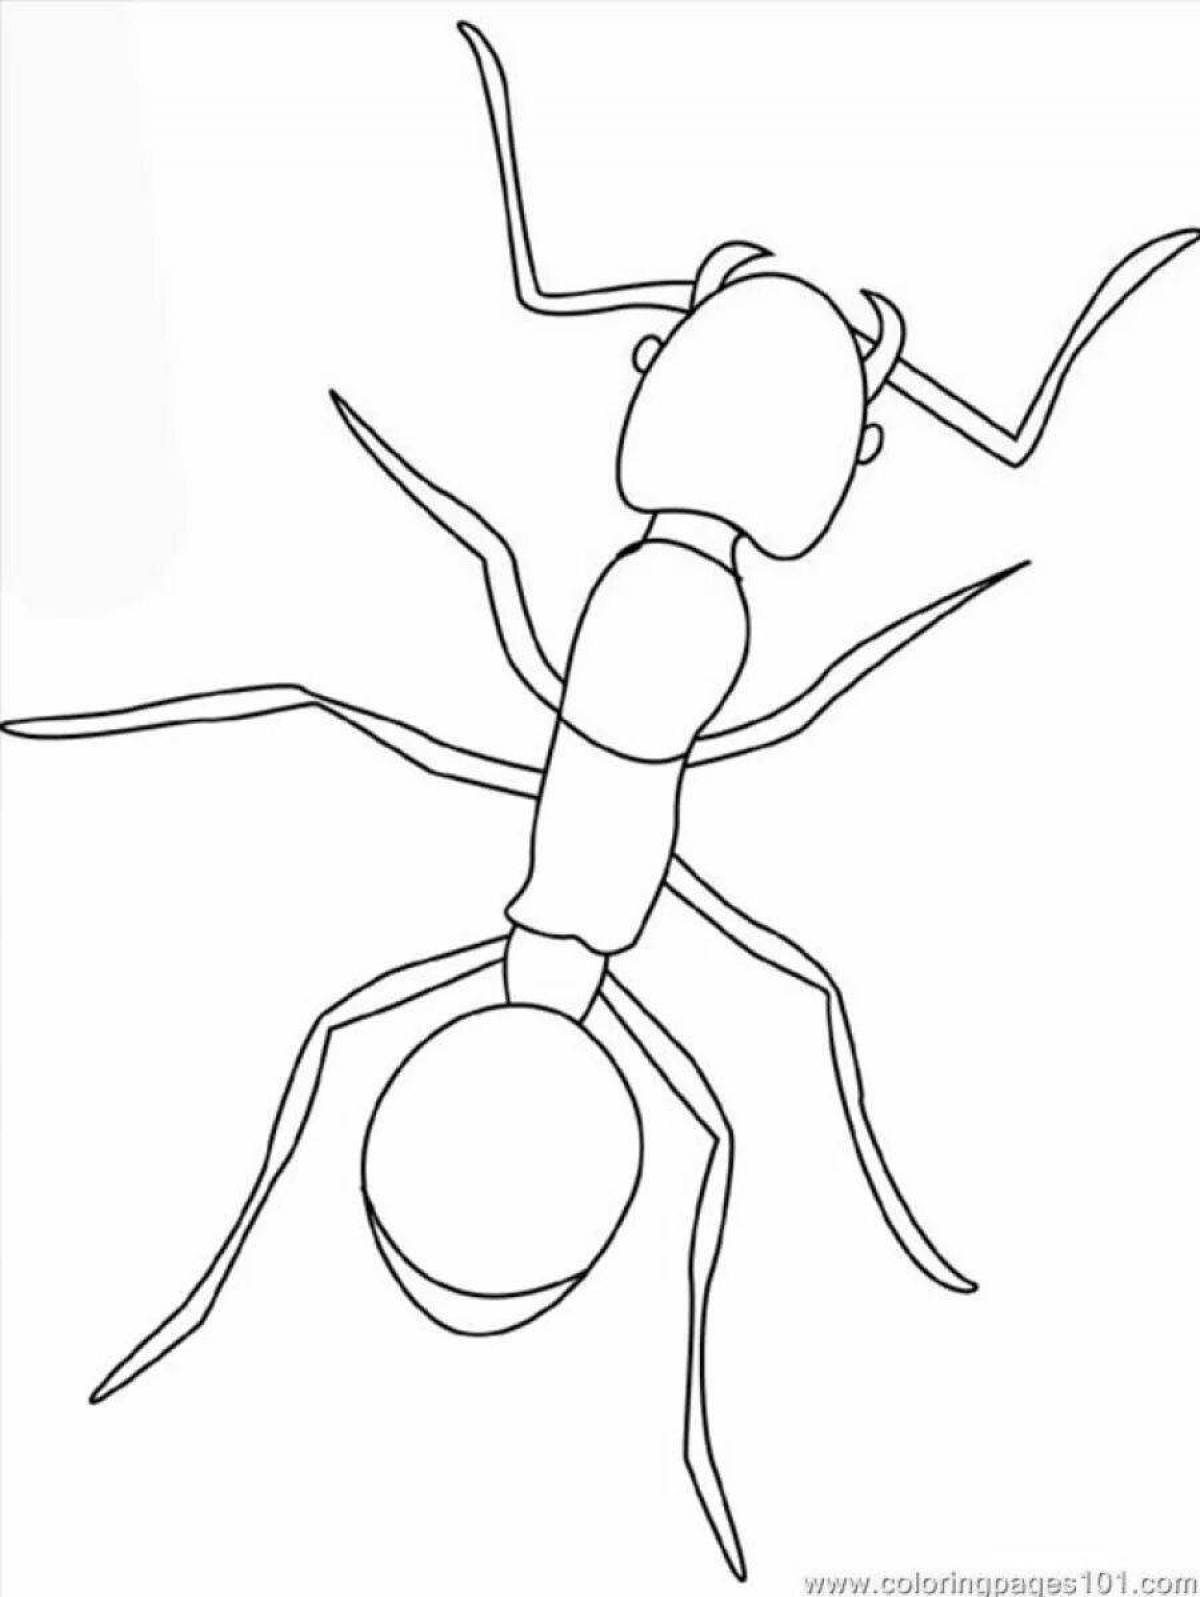 Delightful drawing of an ant